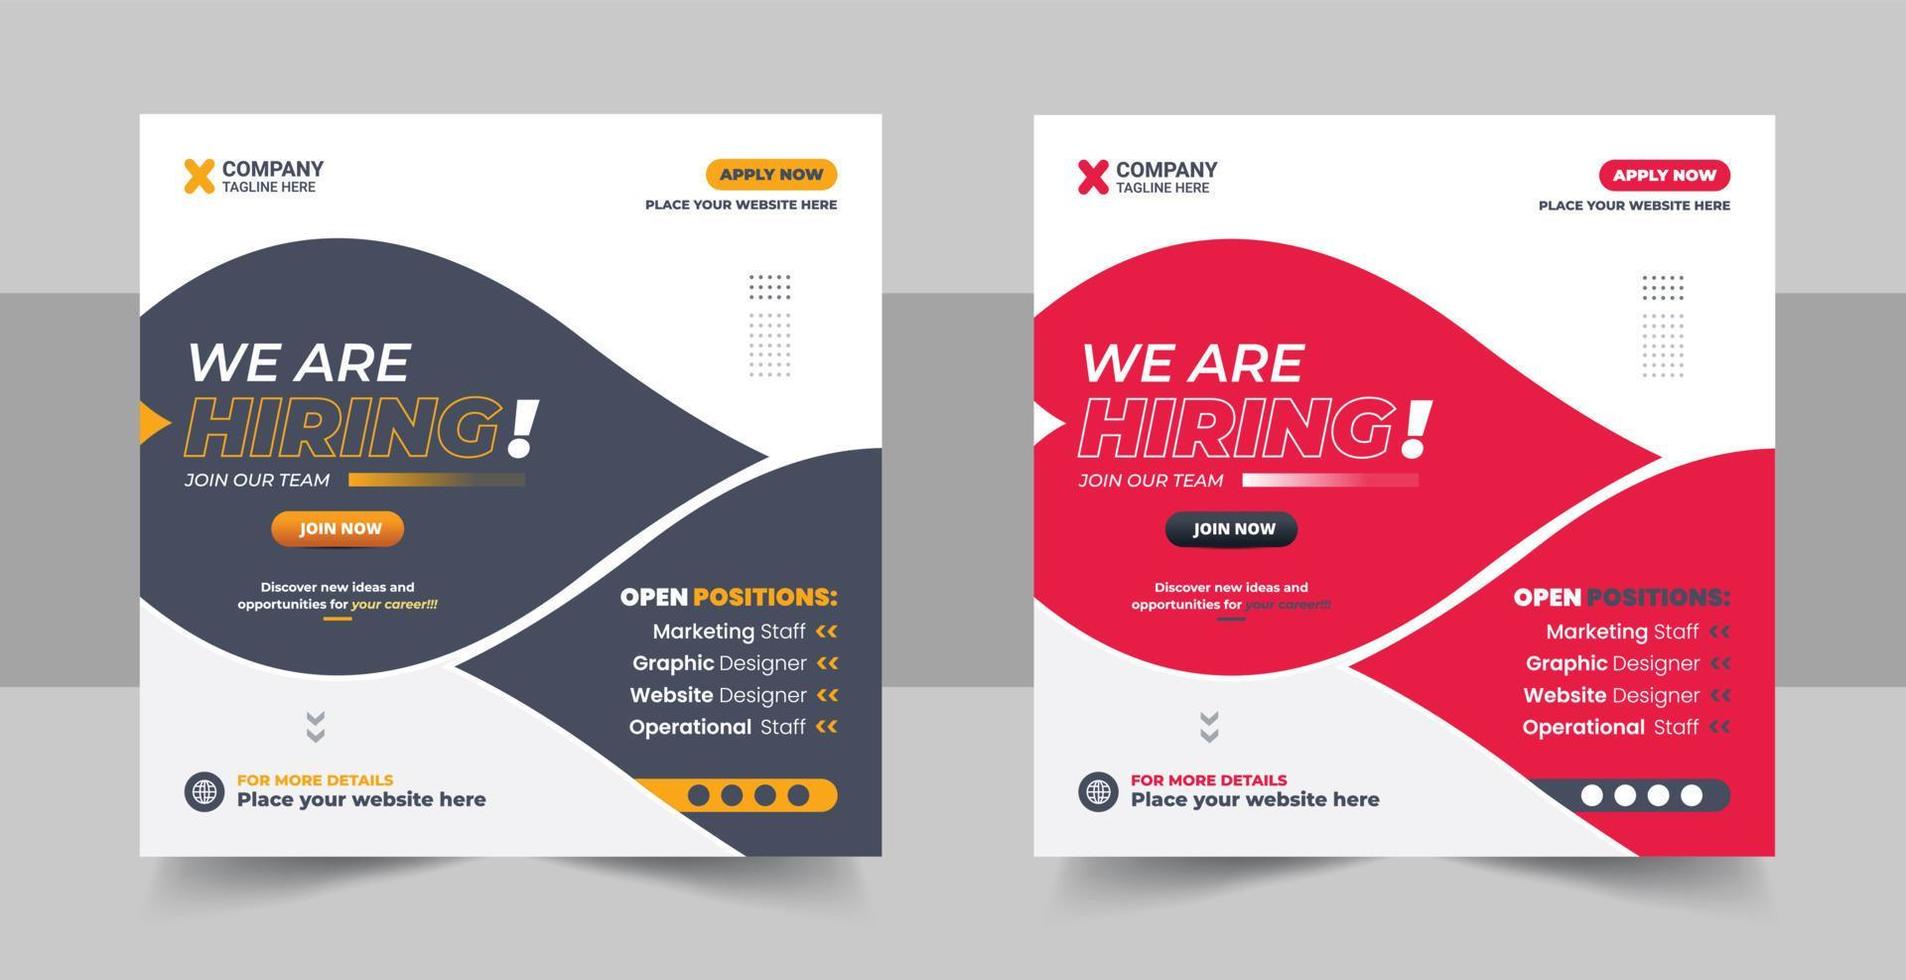 We are hiring job vacancy social media post banner design template with red color. We are hiring job vacancy square web banner design vector